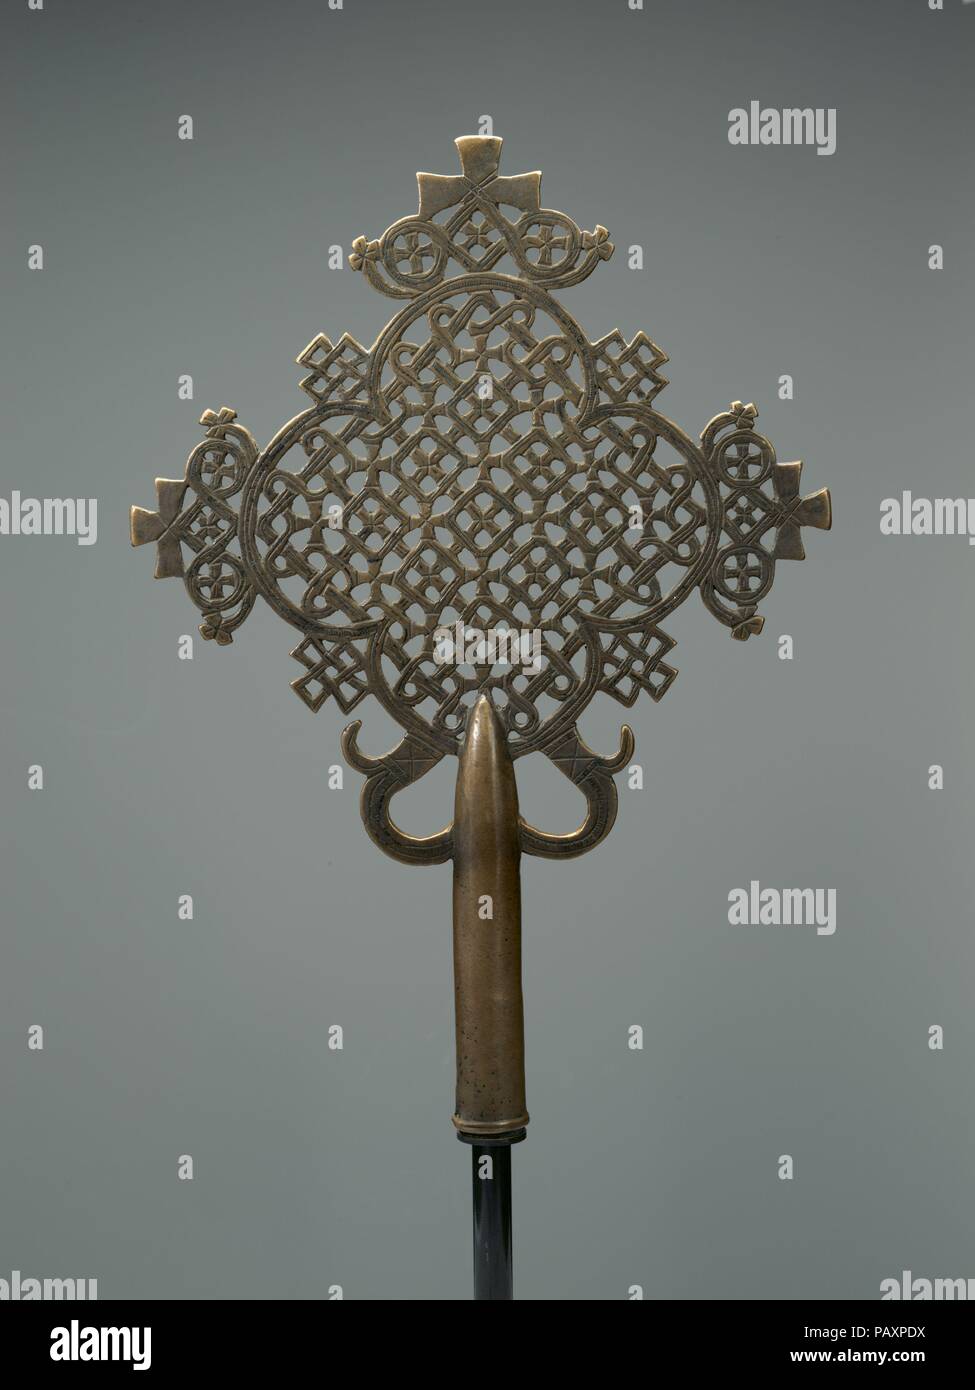 Processional Cross. Culture: Ethiopia, Lasta region. Dimensions: H. 14 x  W. 9 13/16 in. (35.5 x 24.9 cm). Date: early 15th century.  This work is an exceptional example of a popular early 15th century cast copper alloy openwork processional cross developed in Ethiopia -- an art form that has been endlessly reinvented by regional artists. In this example, the ornament is freely worked, while the form is highly symmetrical.    From the time of the adoption of Christianity --  around 330 A.D. --  crosses have been omnipresent not only as liturgical objects in the region's churches and monasterie Stock Photo